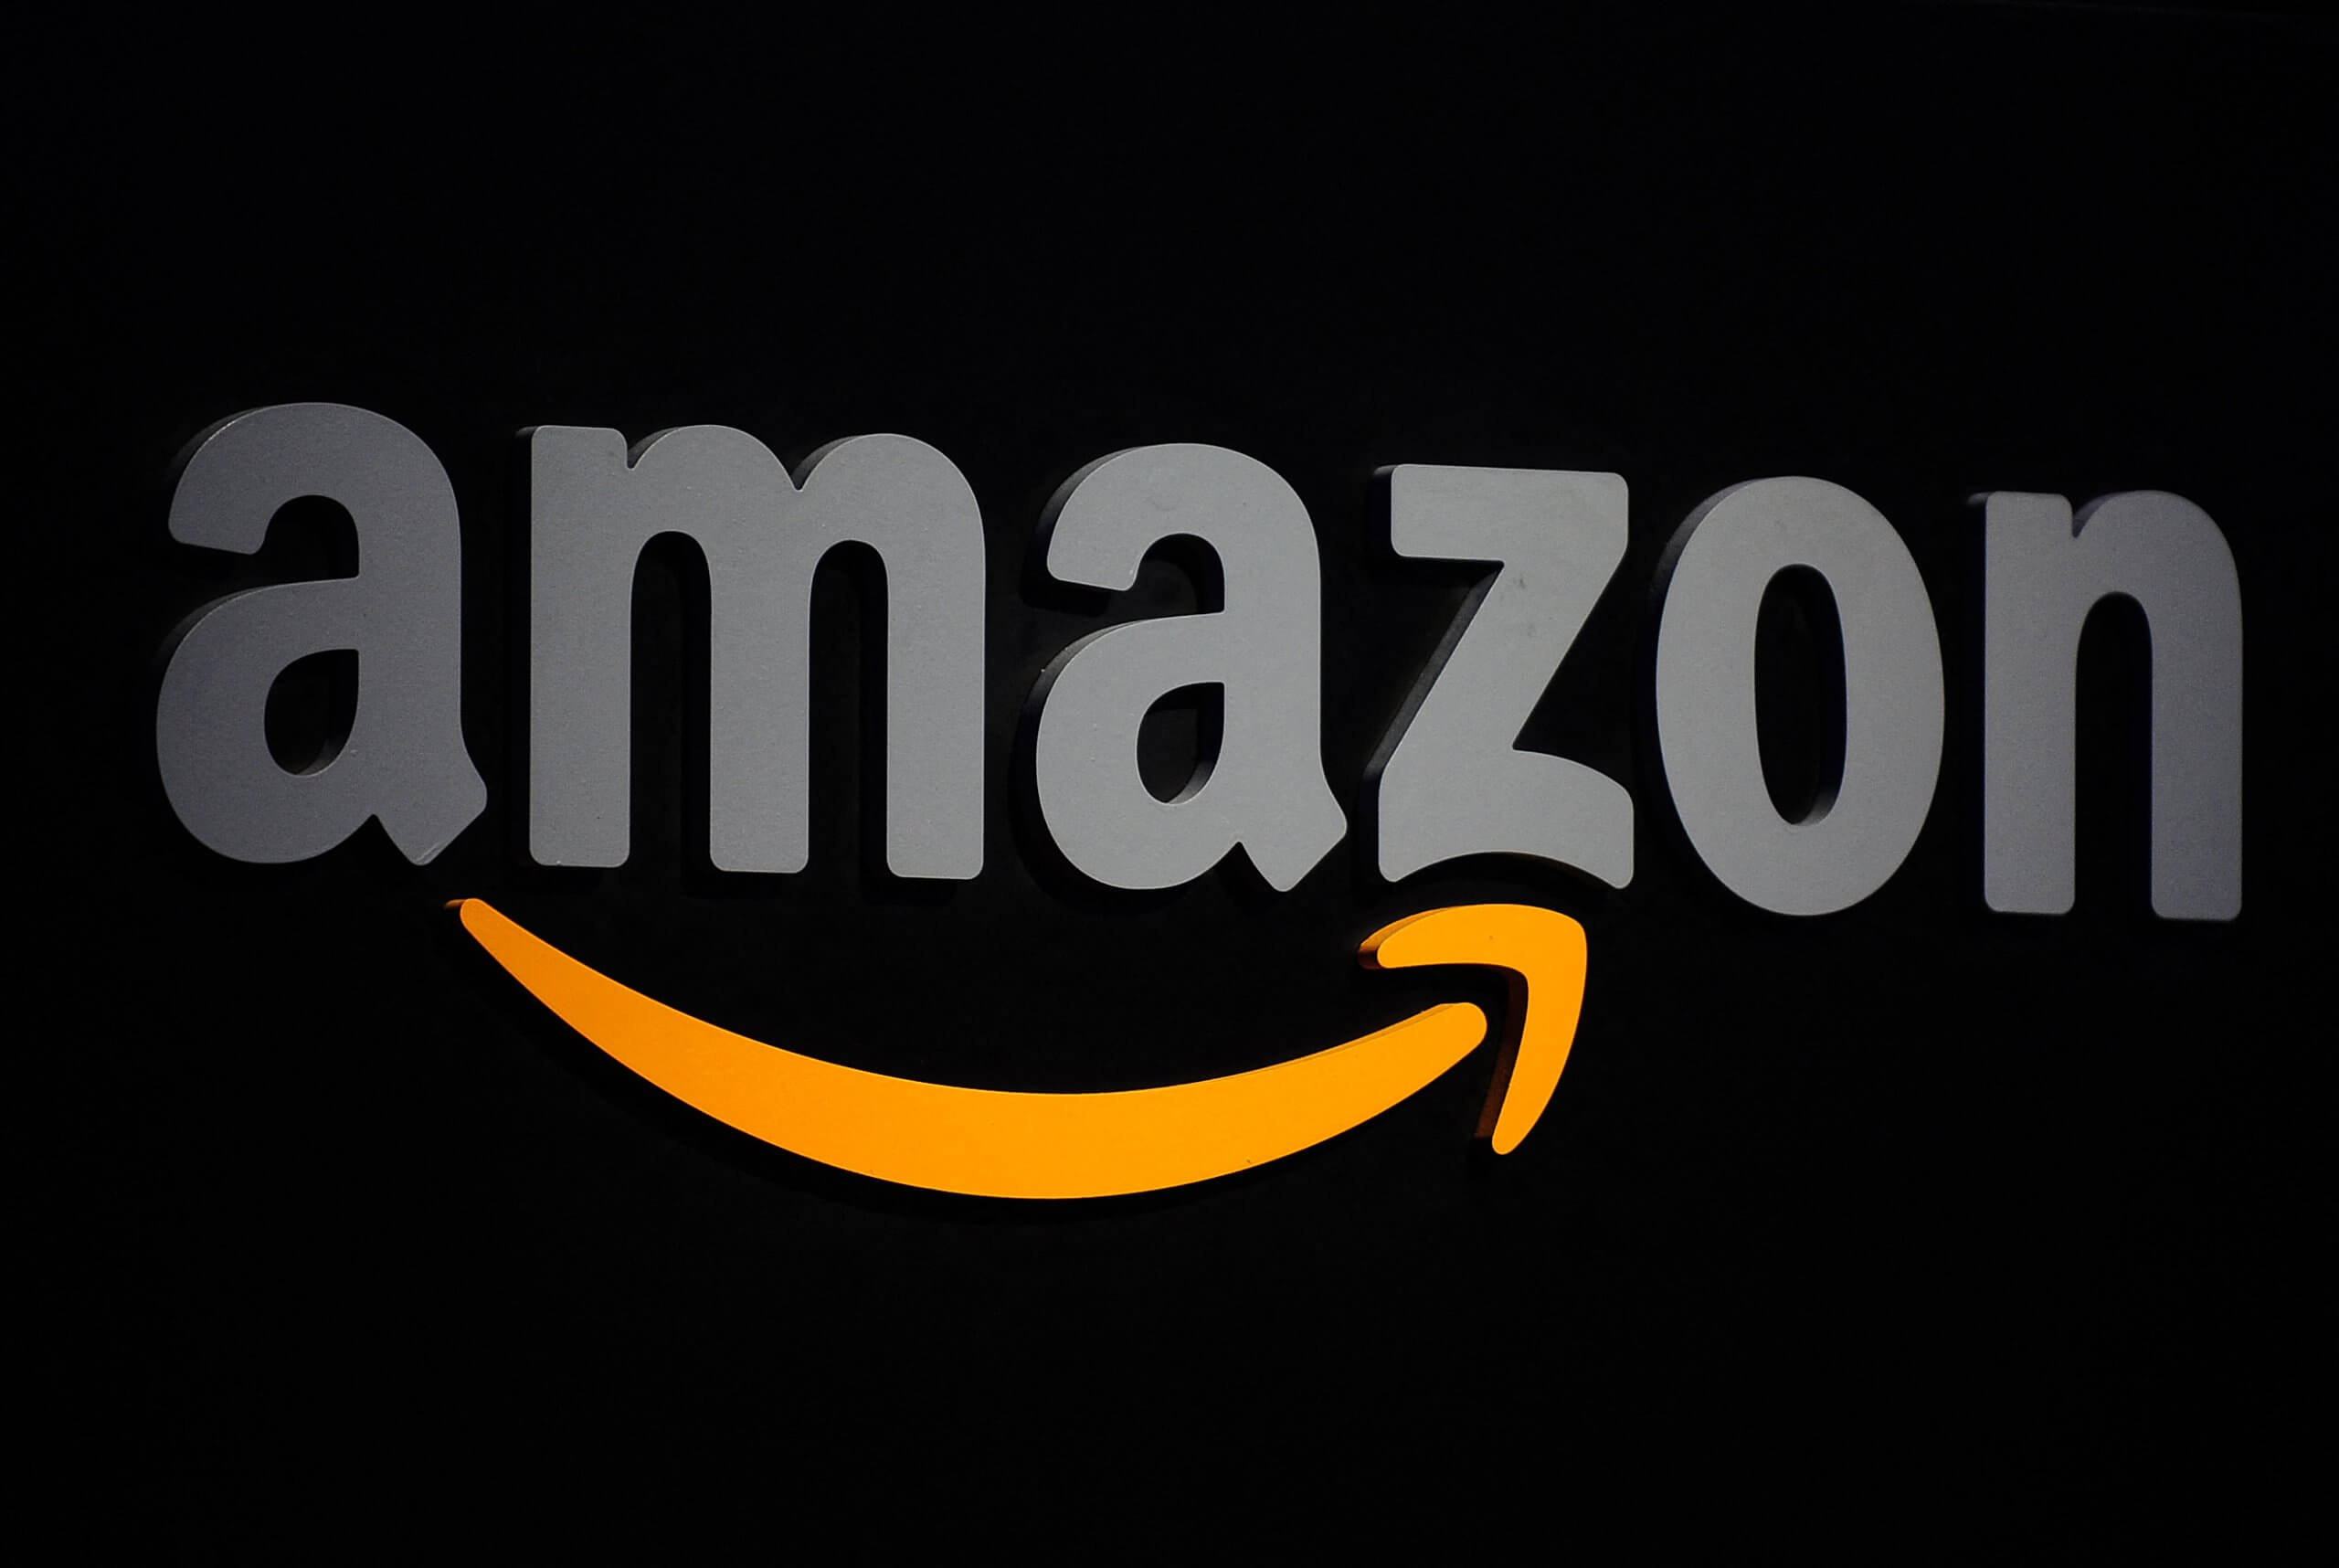 Amazon is slapped with the biggest ever EU data privacy fine.